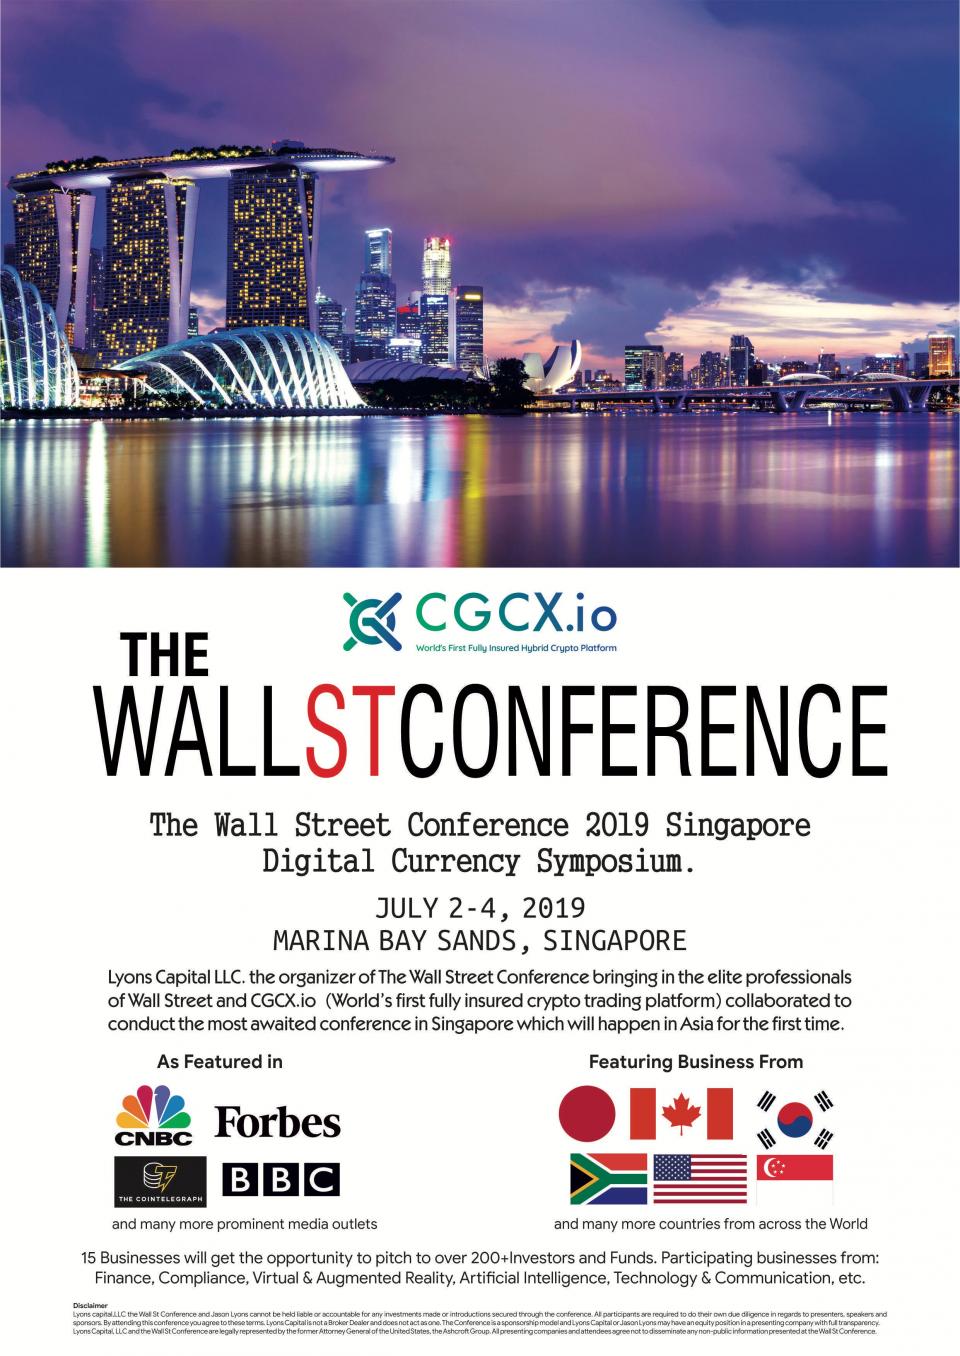 The Wall Street Conference 2019 Singapore Digital Currency Symposium by